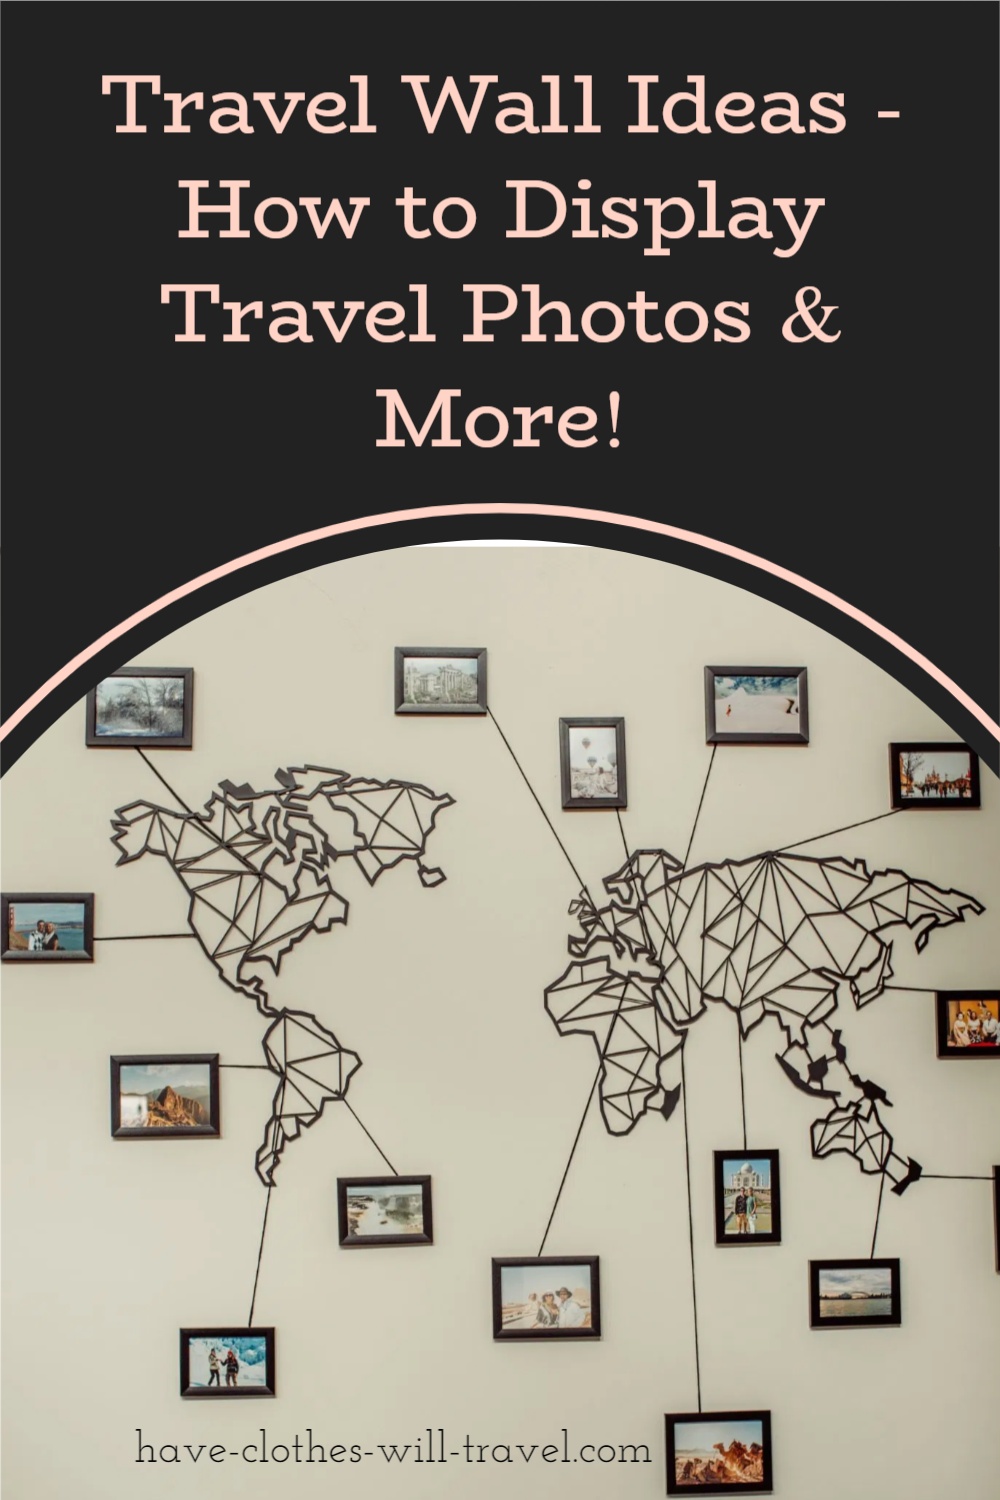 A Pinterest-style graphic with text that says "Travel Wall Ideas - How to Display Travel Photos & More" over an image of a world map with photos on a wall.